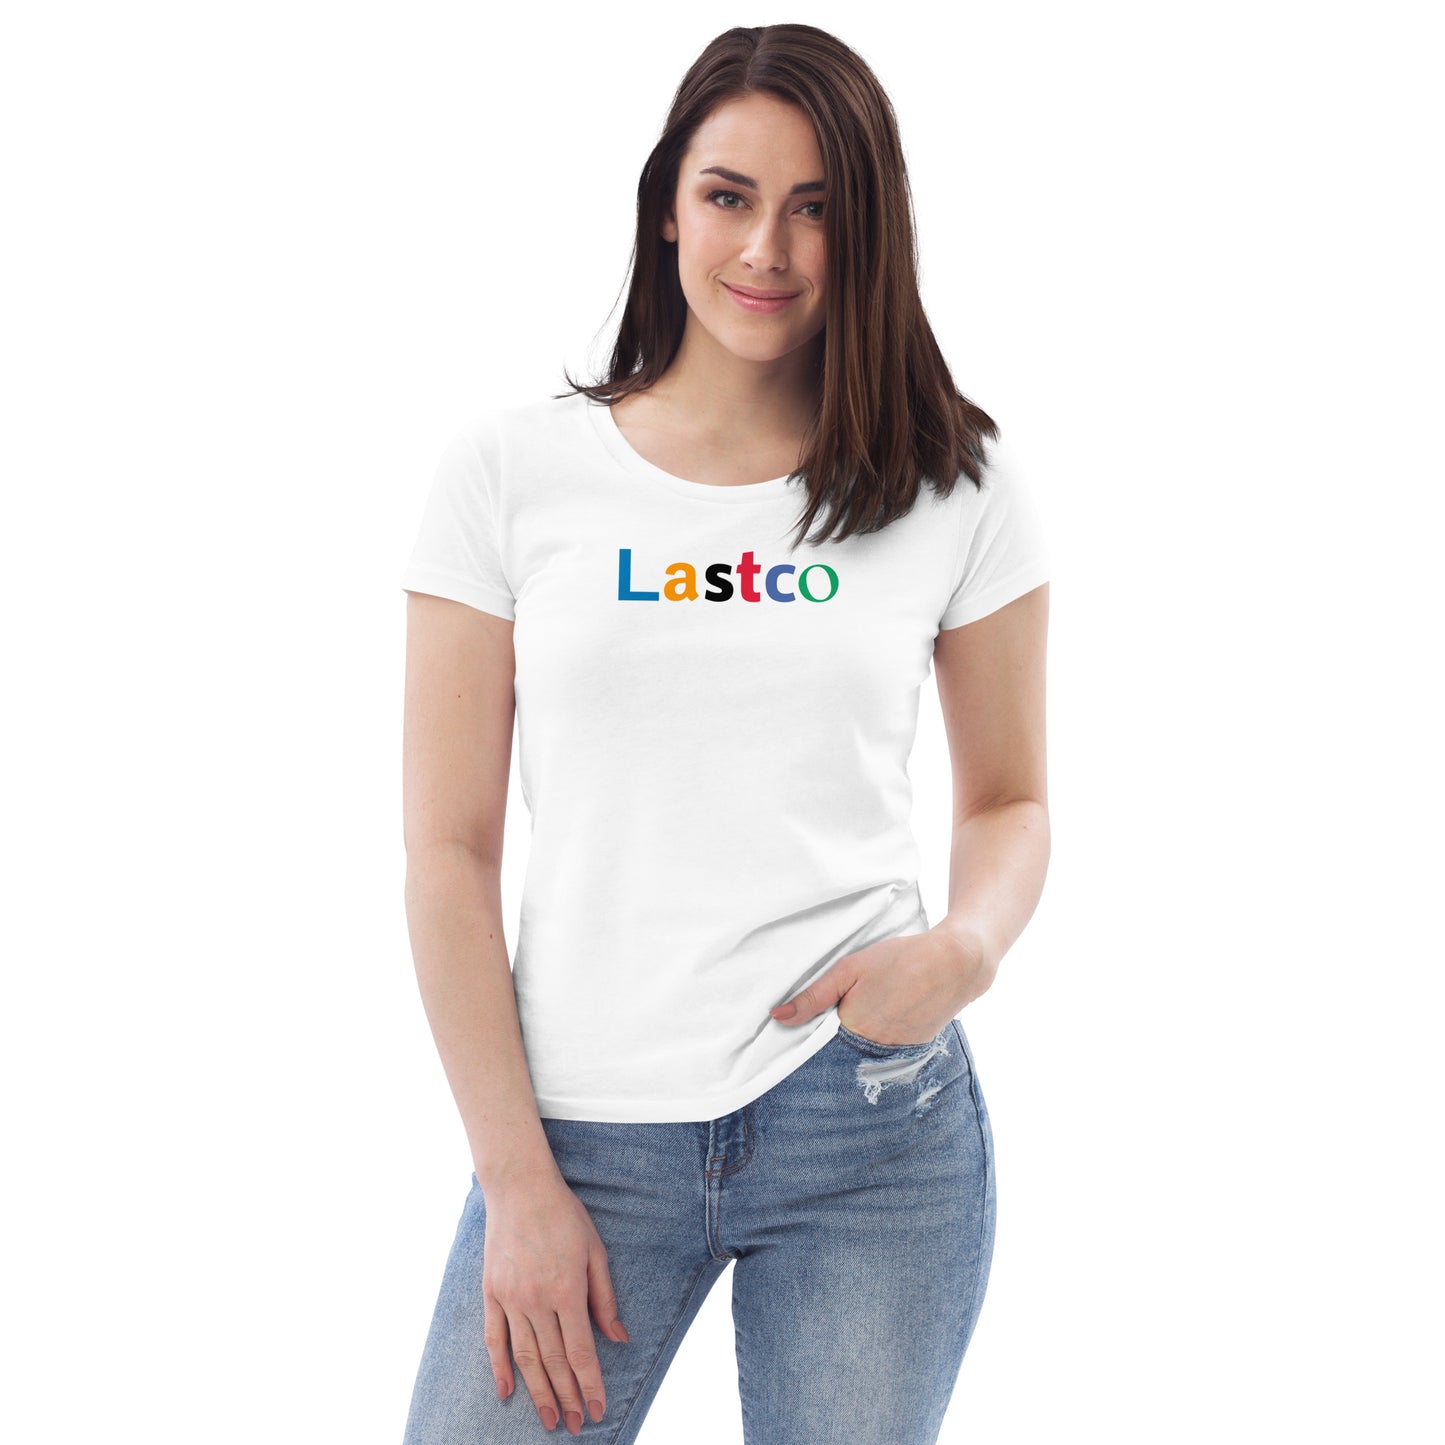 Lastco Color Women's fitted eco tee